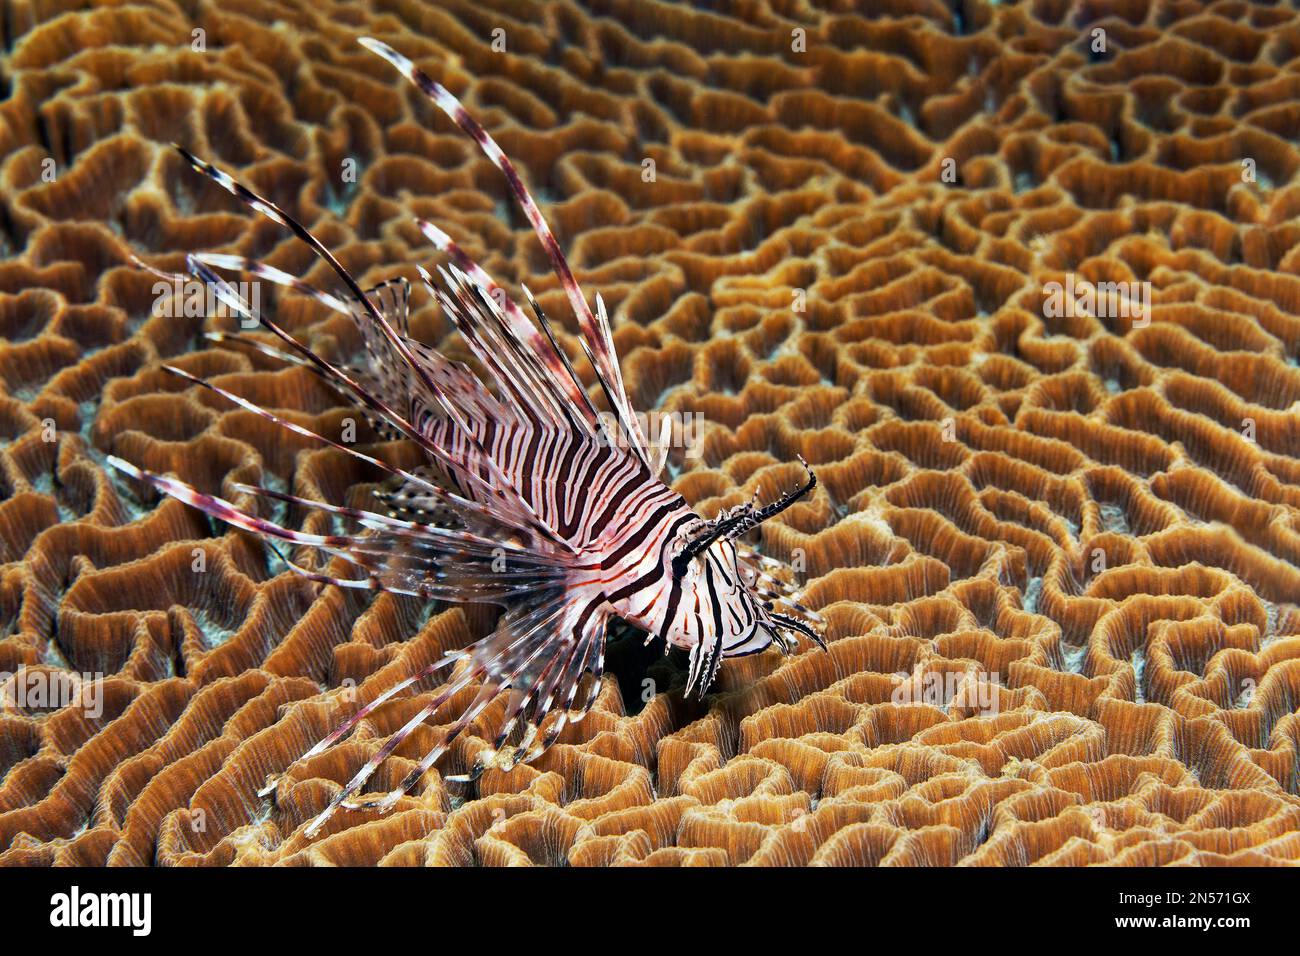 Pacific red lionfish (Pterois volitans) on Favia lesser valley coral (Platygyra lamellina), Lake Sawu, Pacific Ocean, Komodo National Park, Lesser Stock Photo